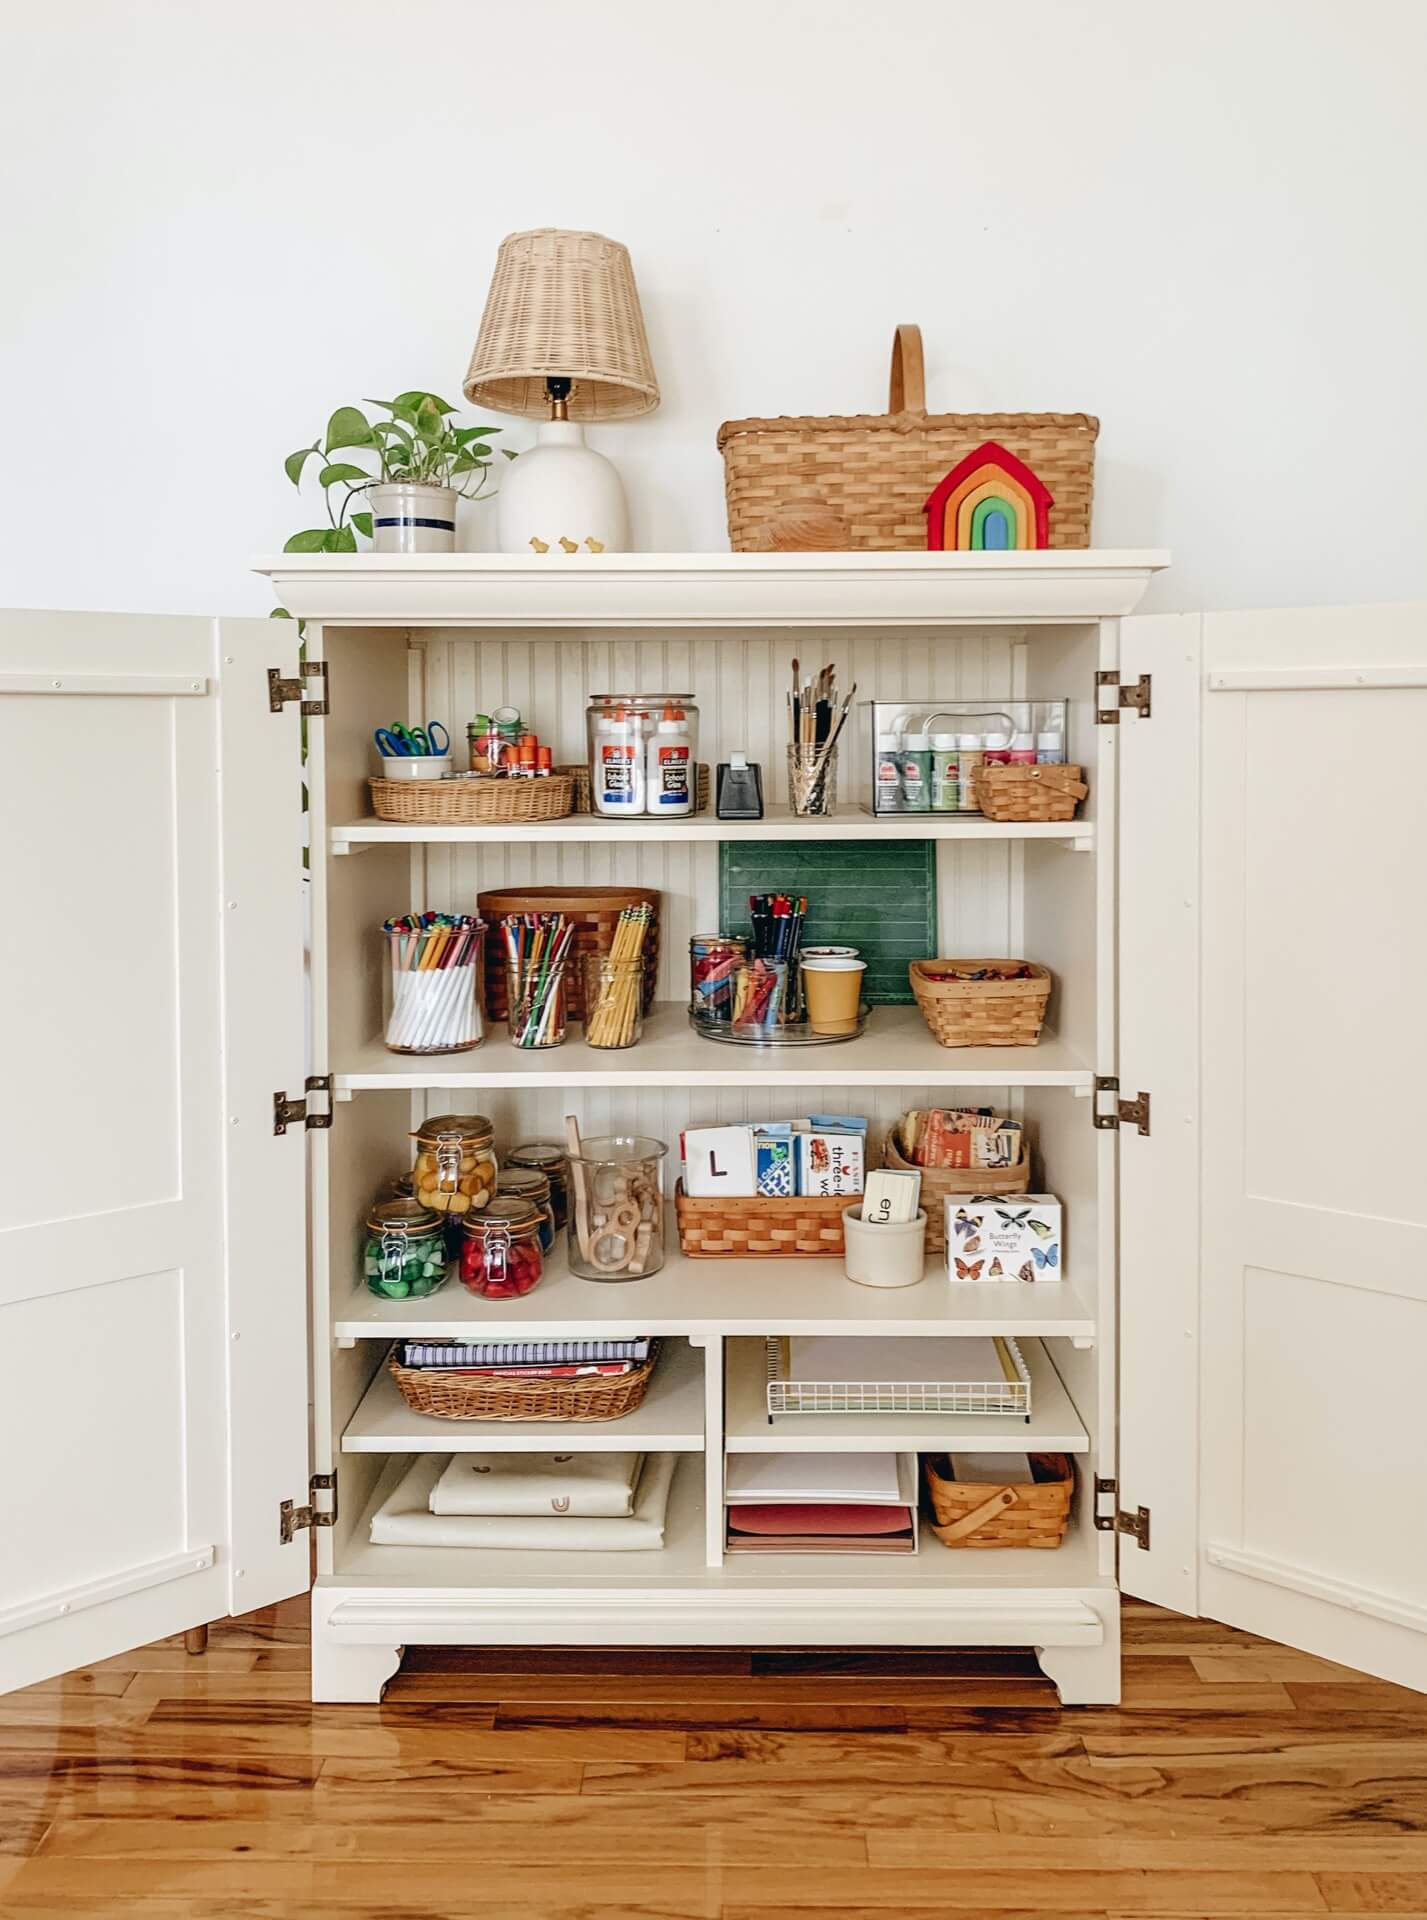 Home tour with Leah Gaeddert - a large vintage cabinet filled with well organised art supplies for kids